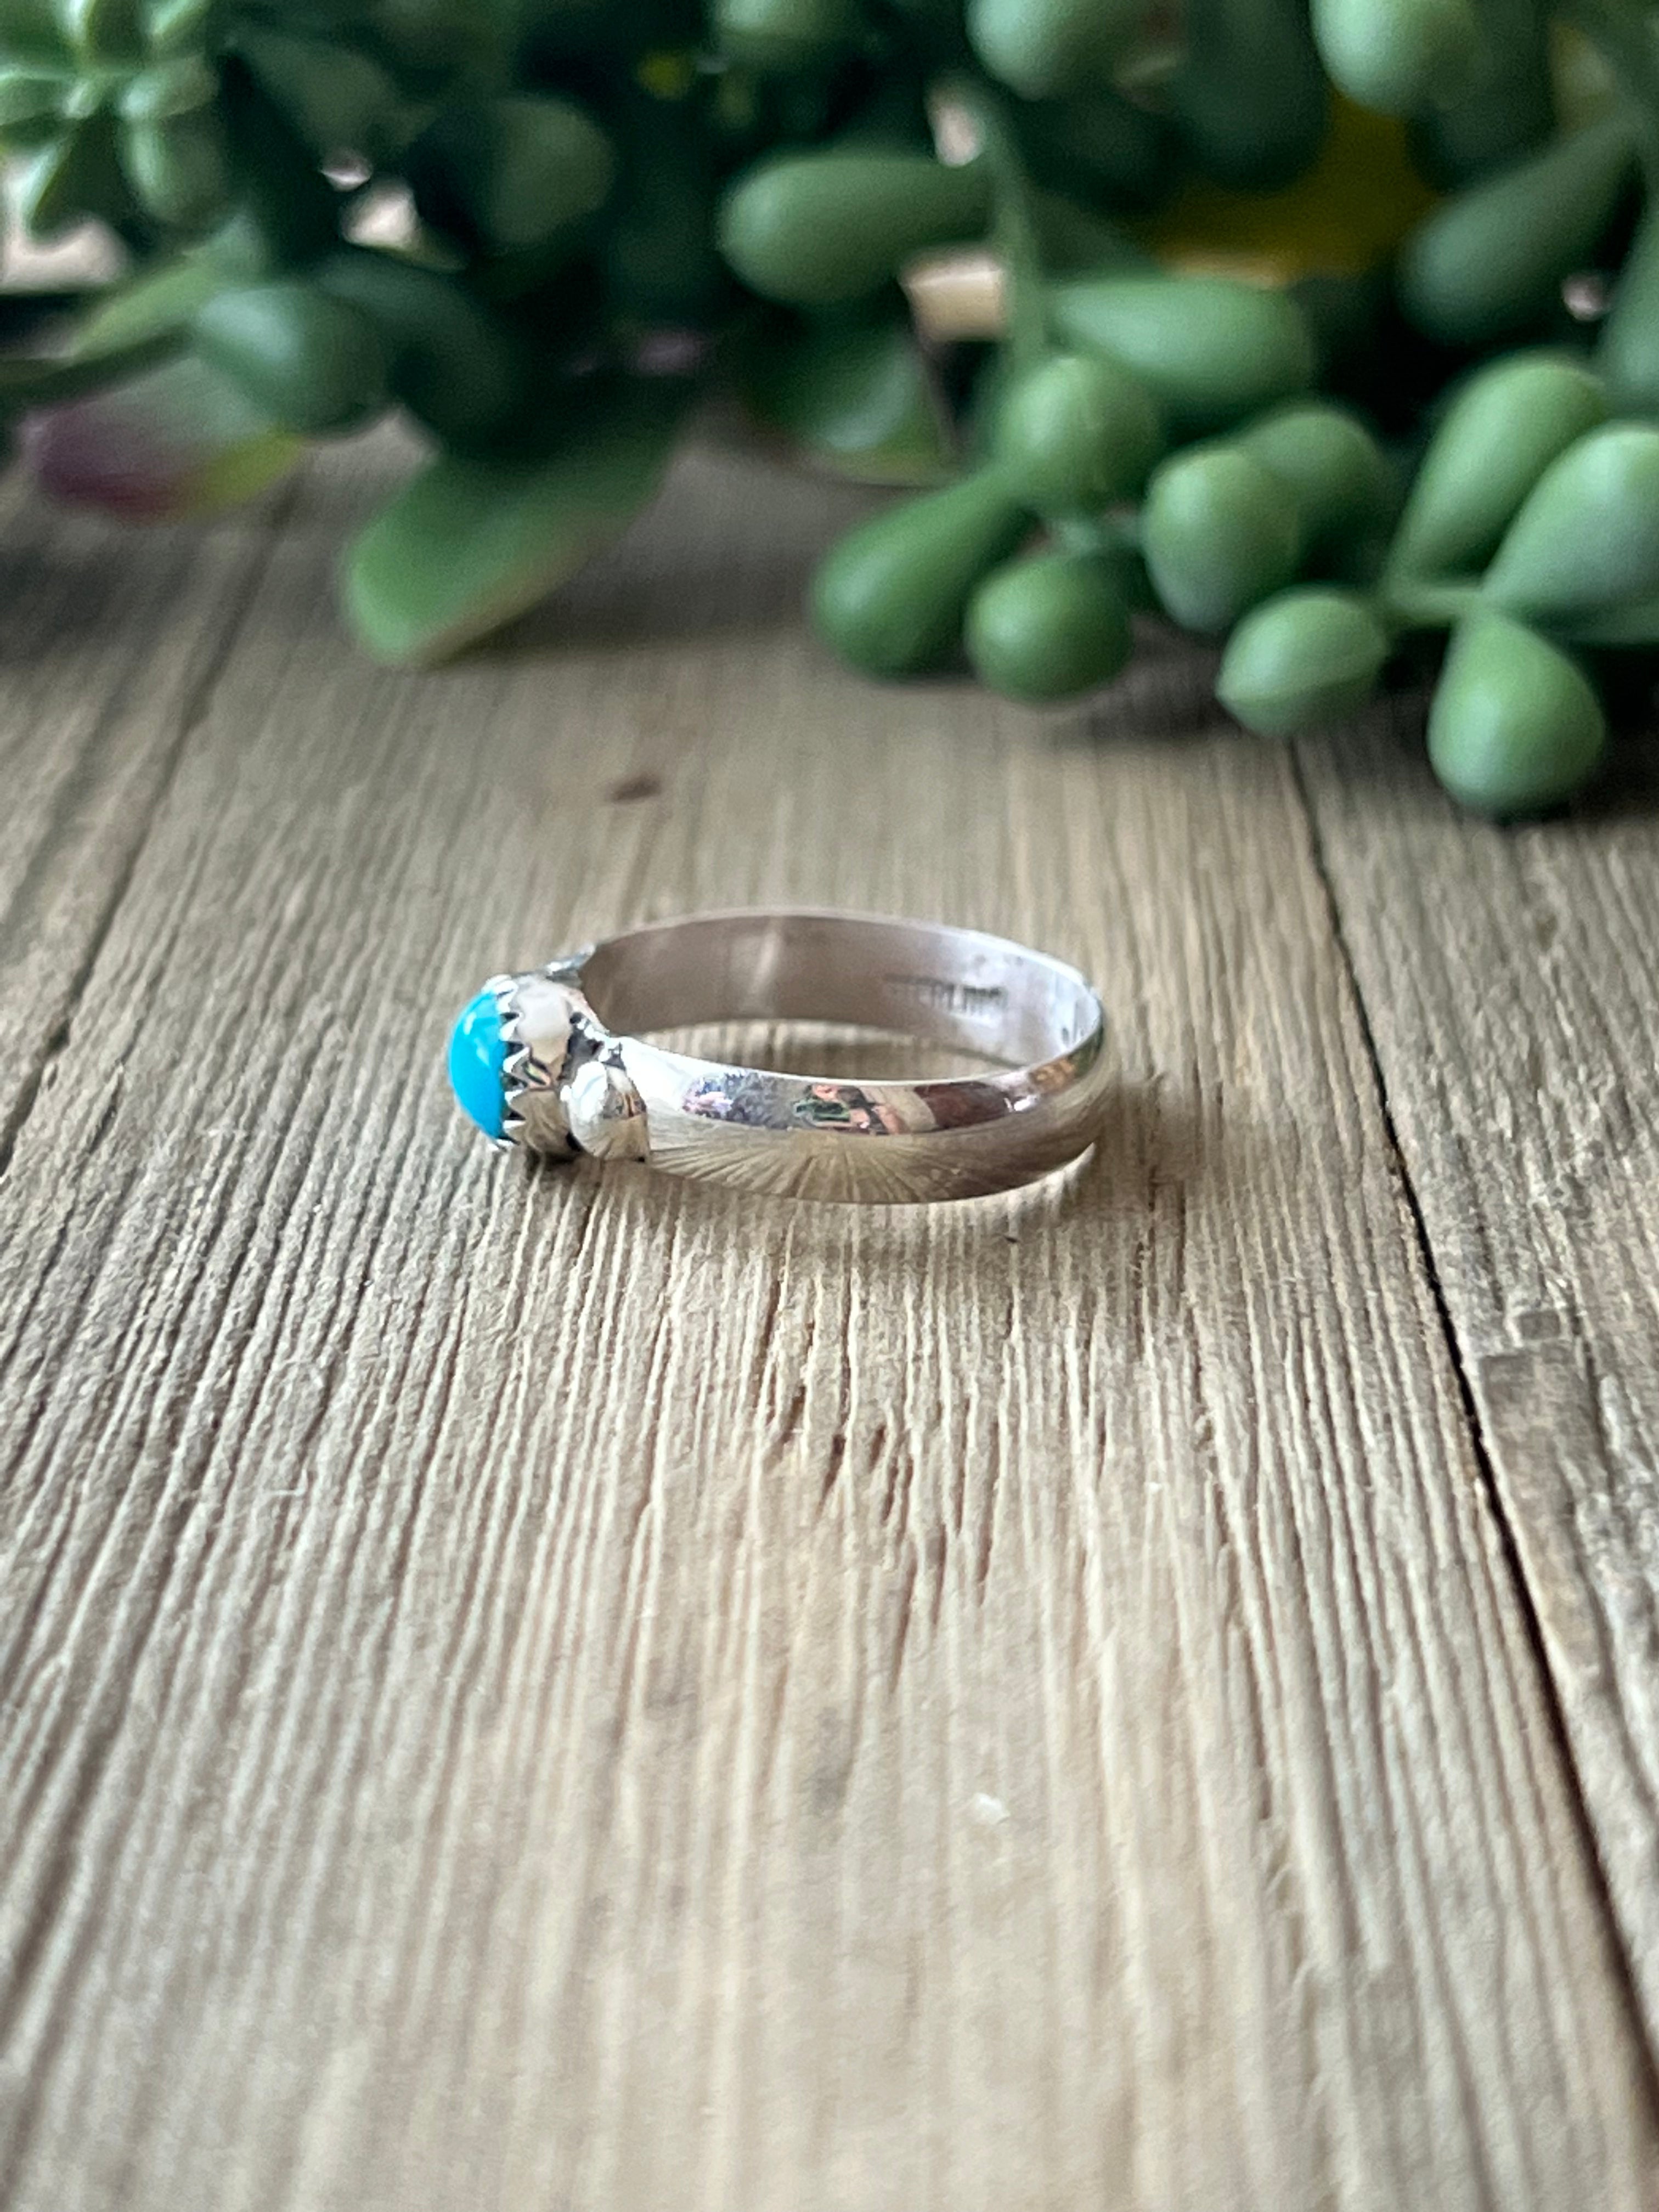 Navajo Made Sleeping Beauty Turquoise & Sterling Silver Ring